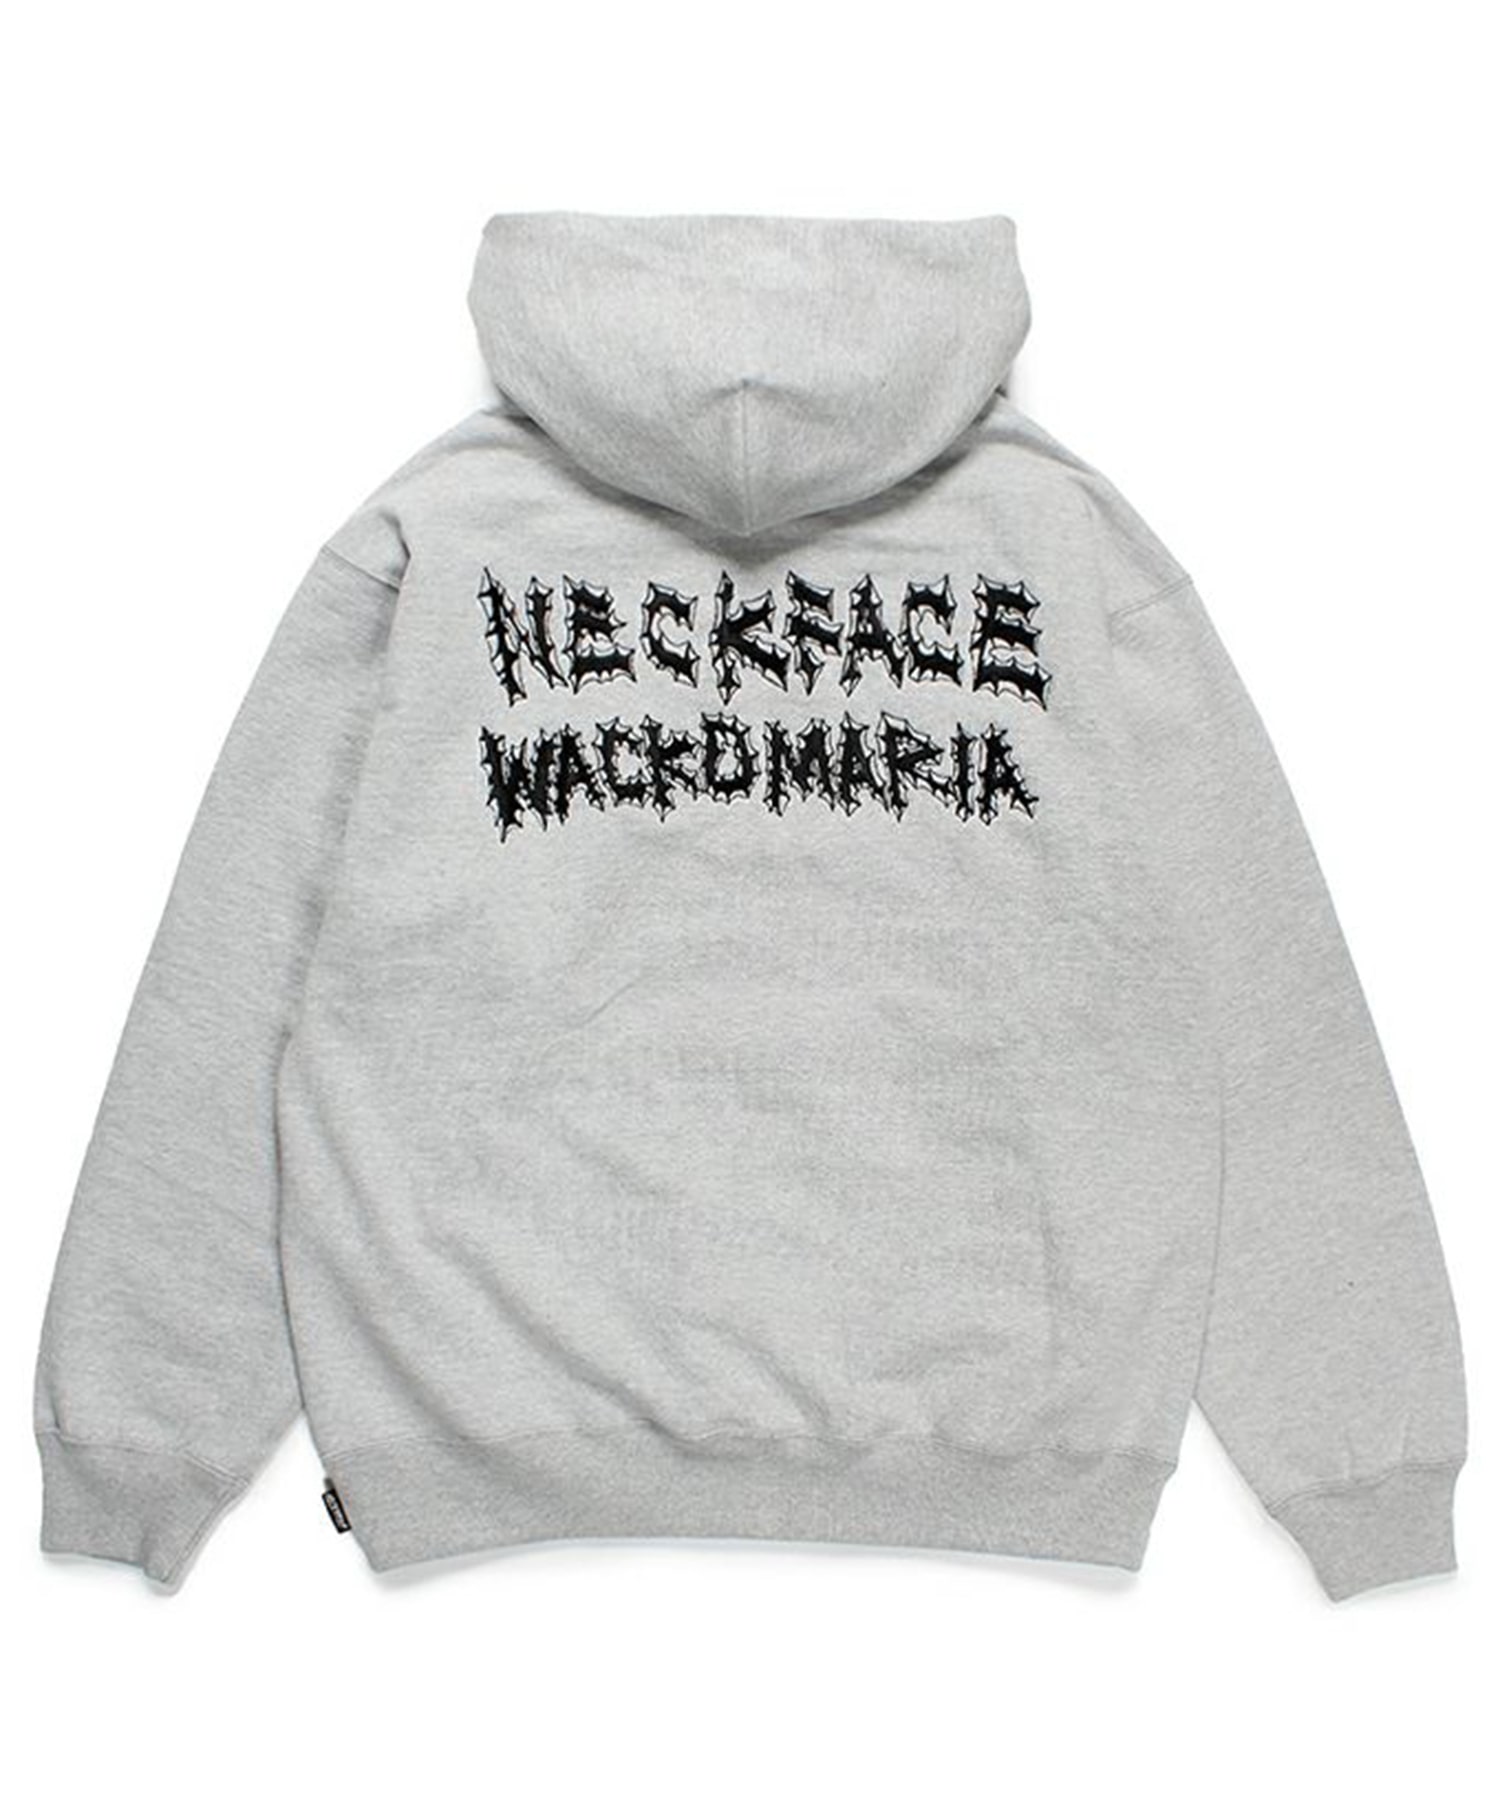 NECK FACE / HEAVY WEIGHT PULLOVER HOODED SWEAT SHIRT